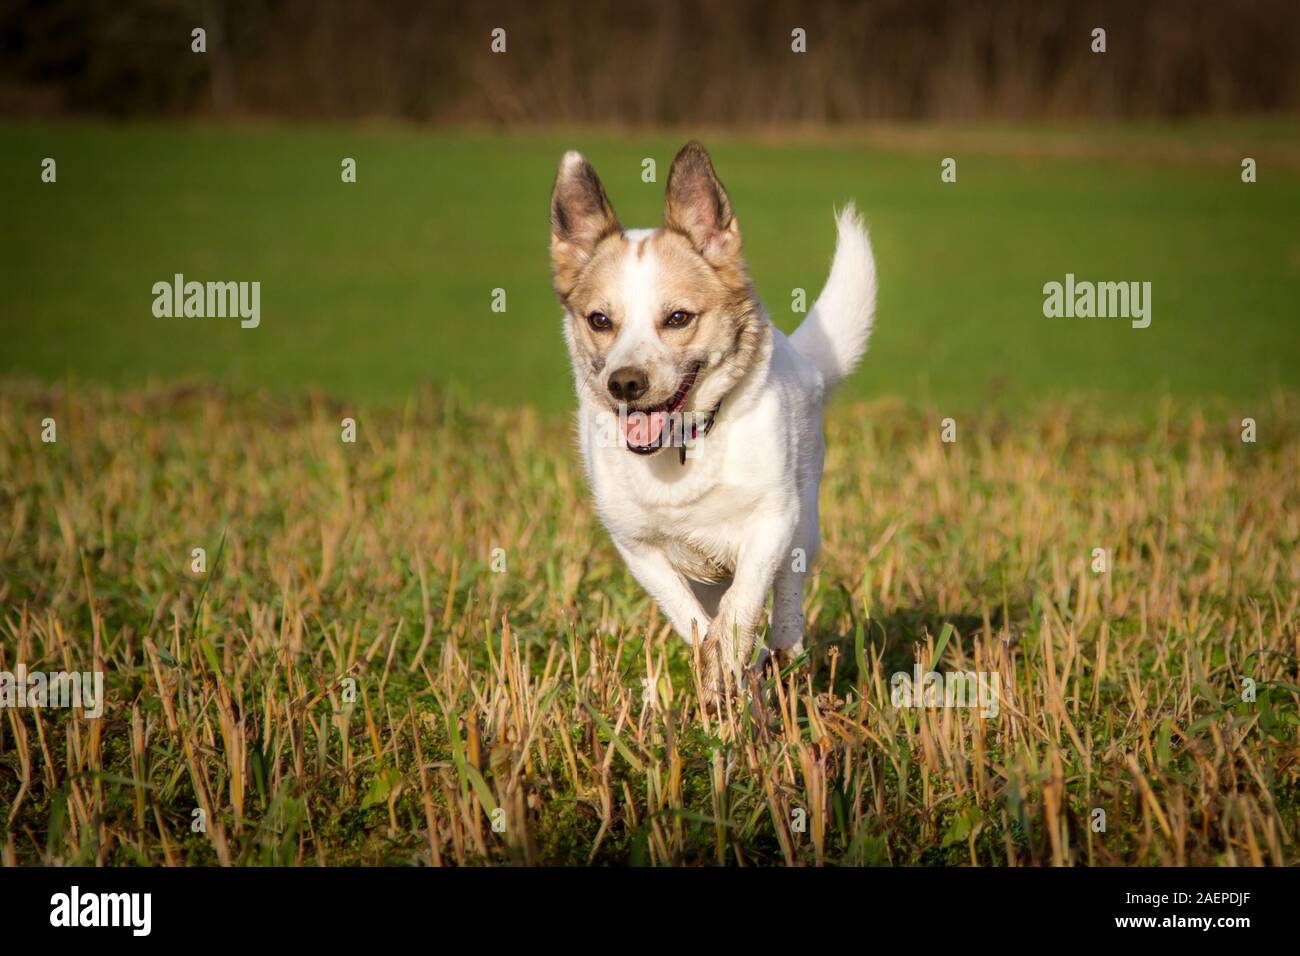 White small mixbreed dog running over a meadow Stock Photo